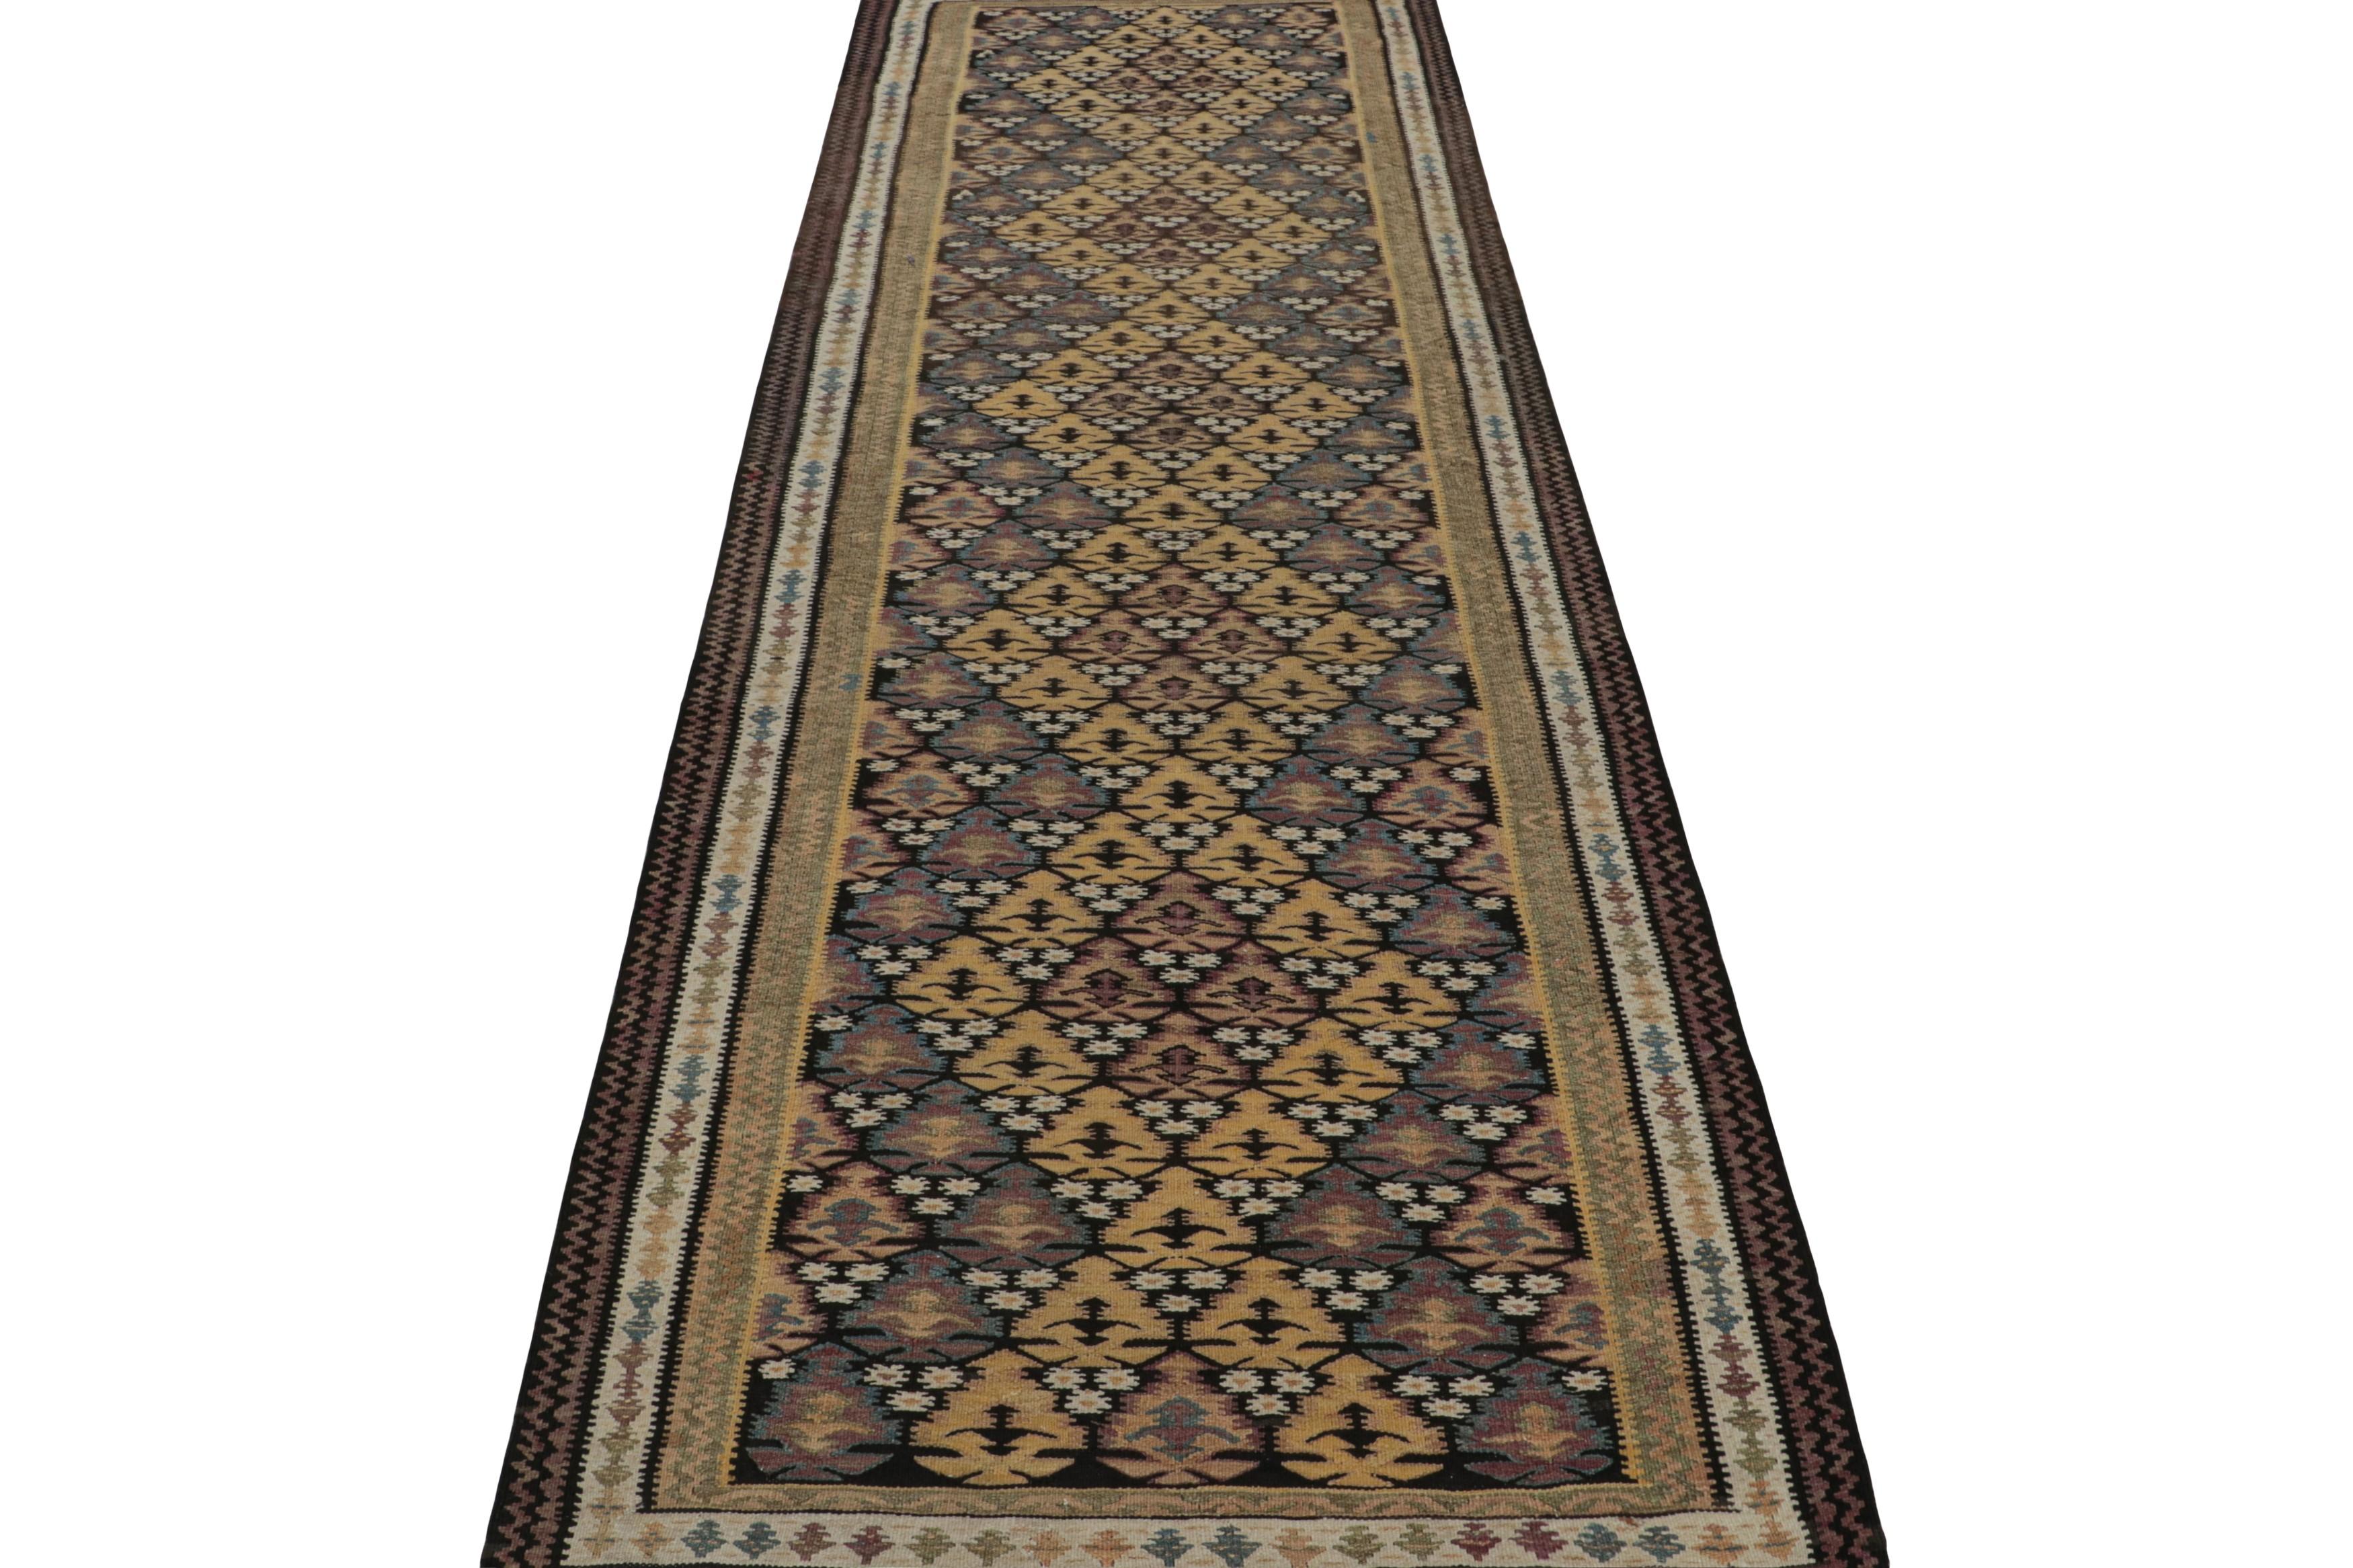 Iraqi Vintage Persian Tribal Runner Rug, with Geometric Patterns, from Rug & Kilim For Sale